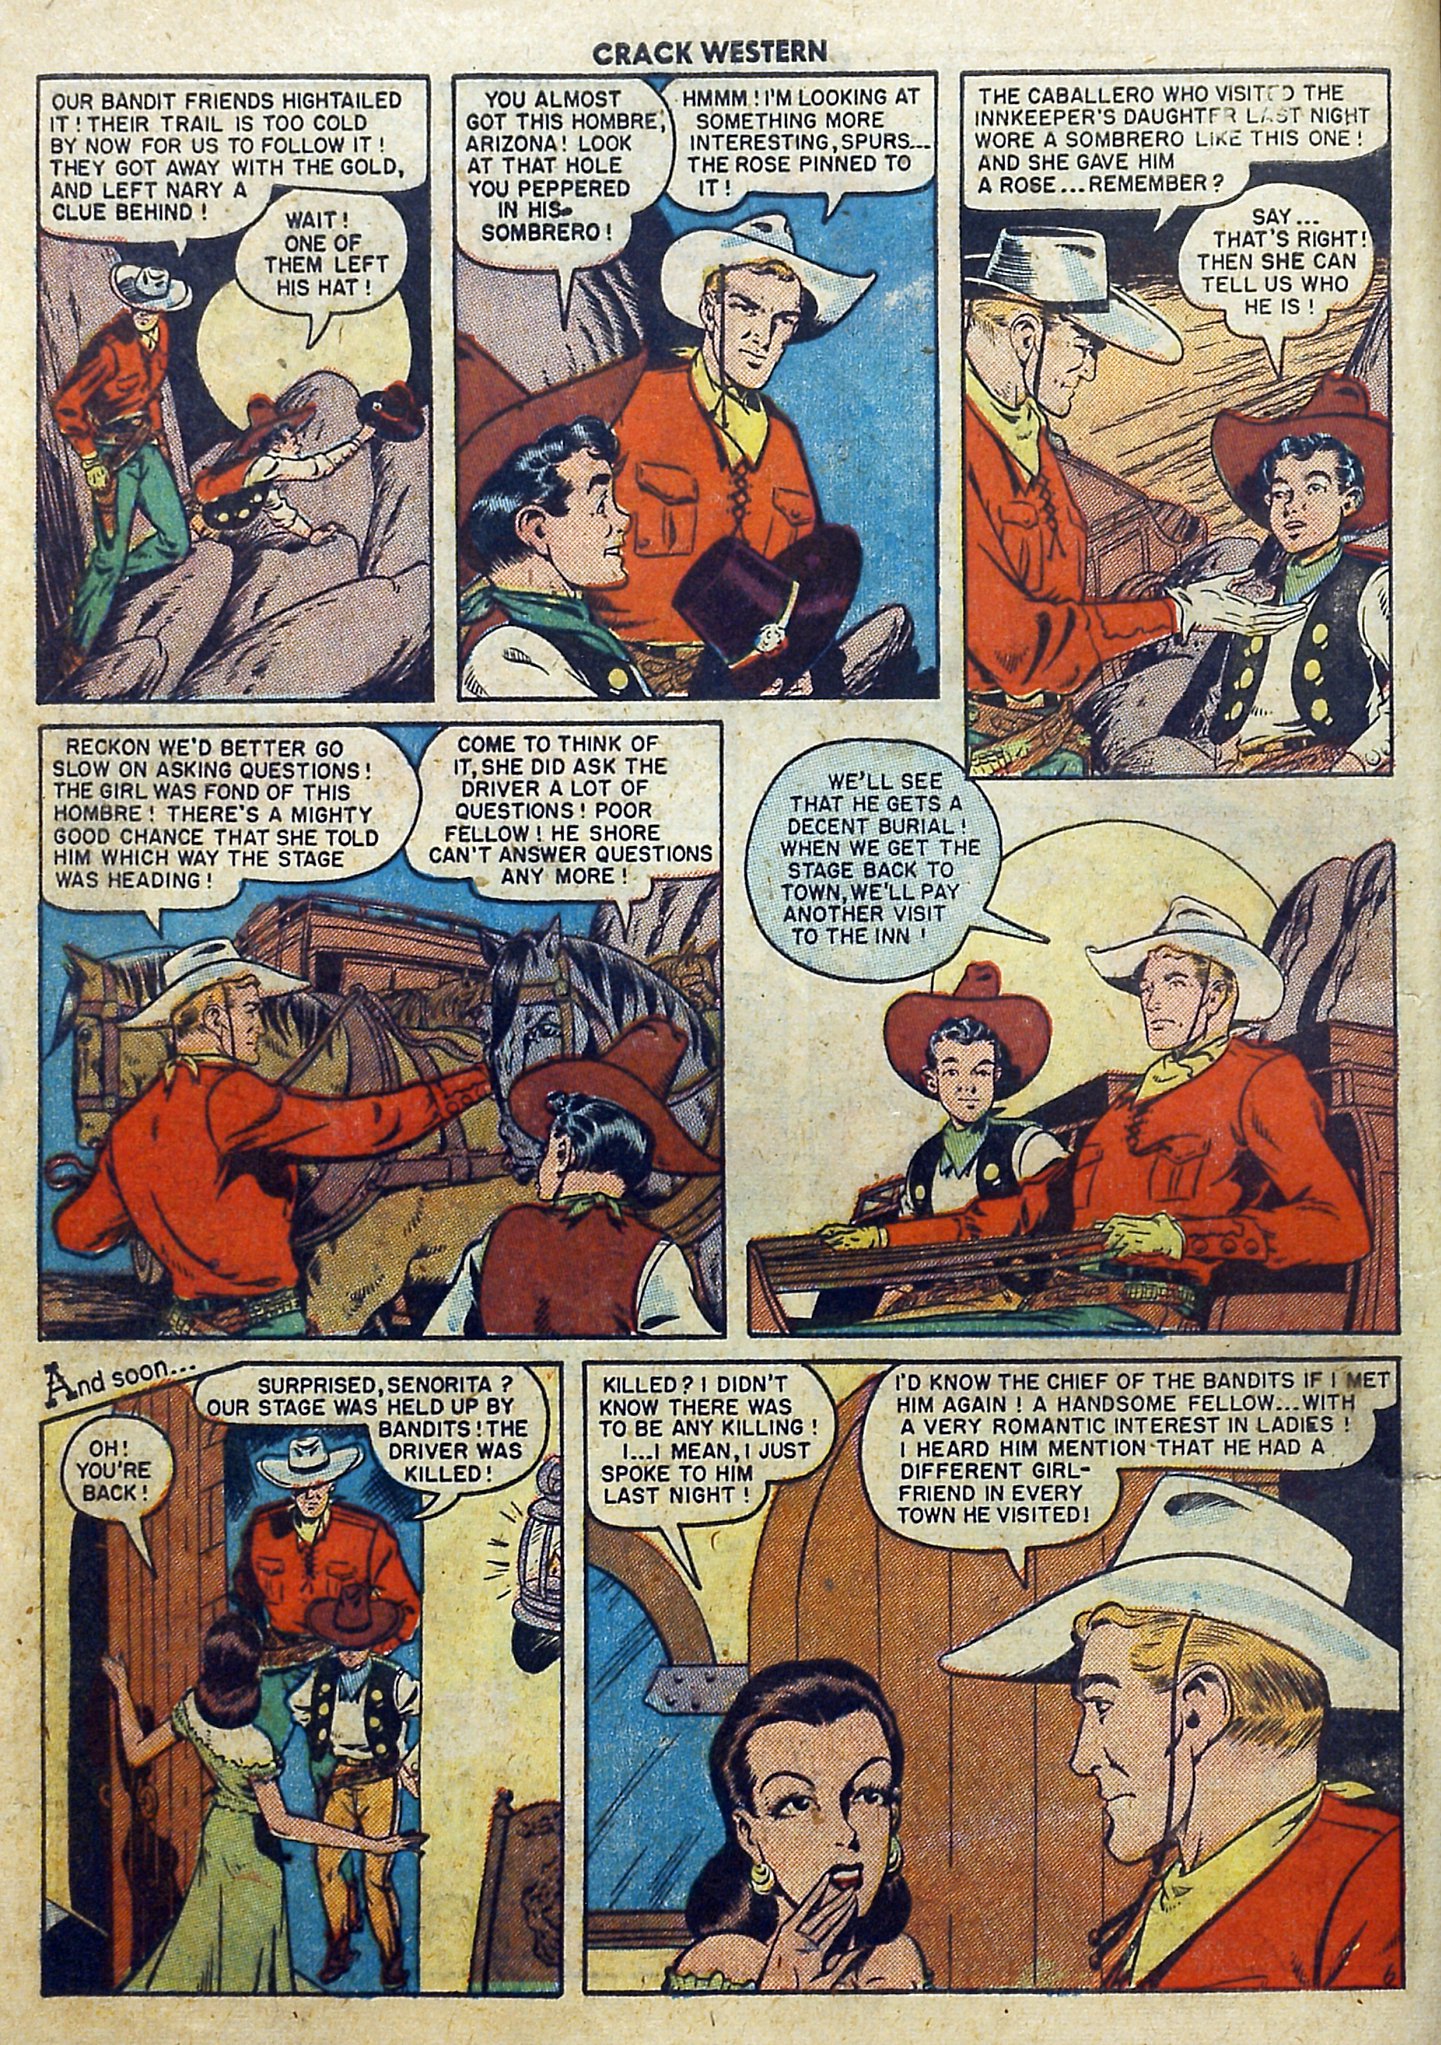 Read online Crack Western comic -  Issue #66 - 8